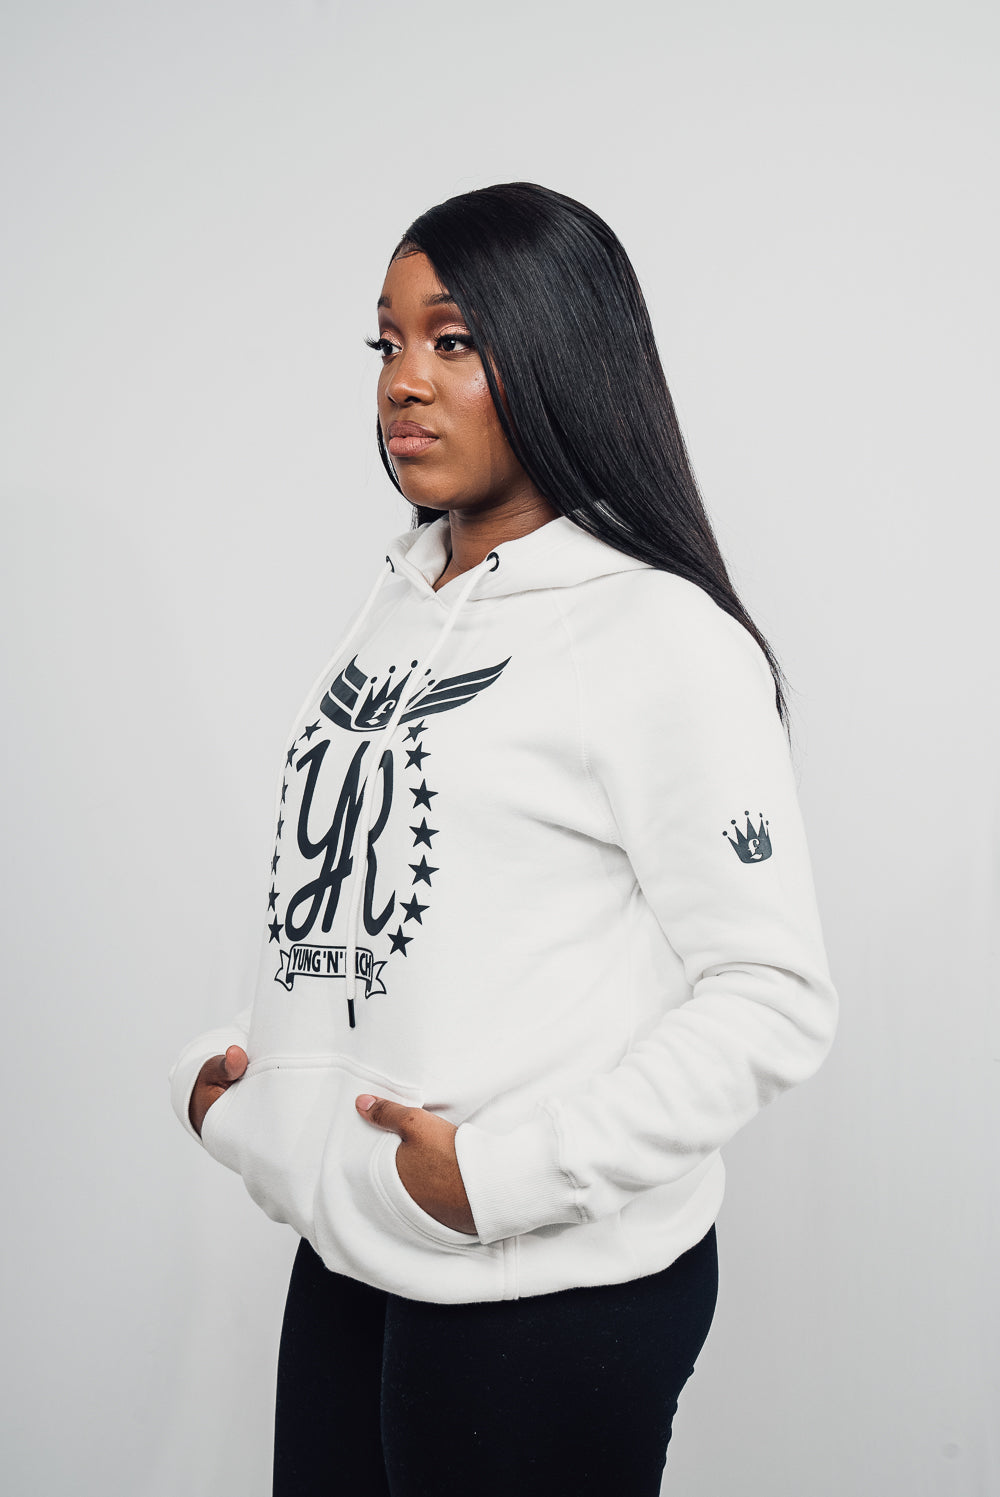 YUNG'N'RICH HOODIE female model - colour white with black rubber Yungnrich logo side veiw with black rubber Yungnrich crown